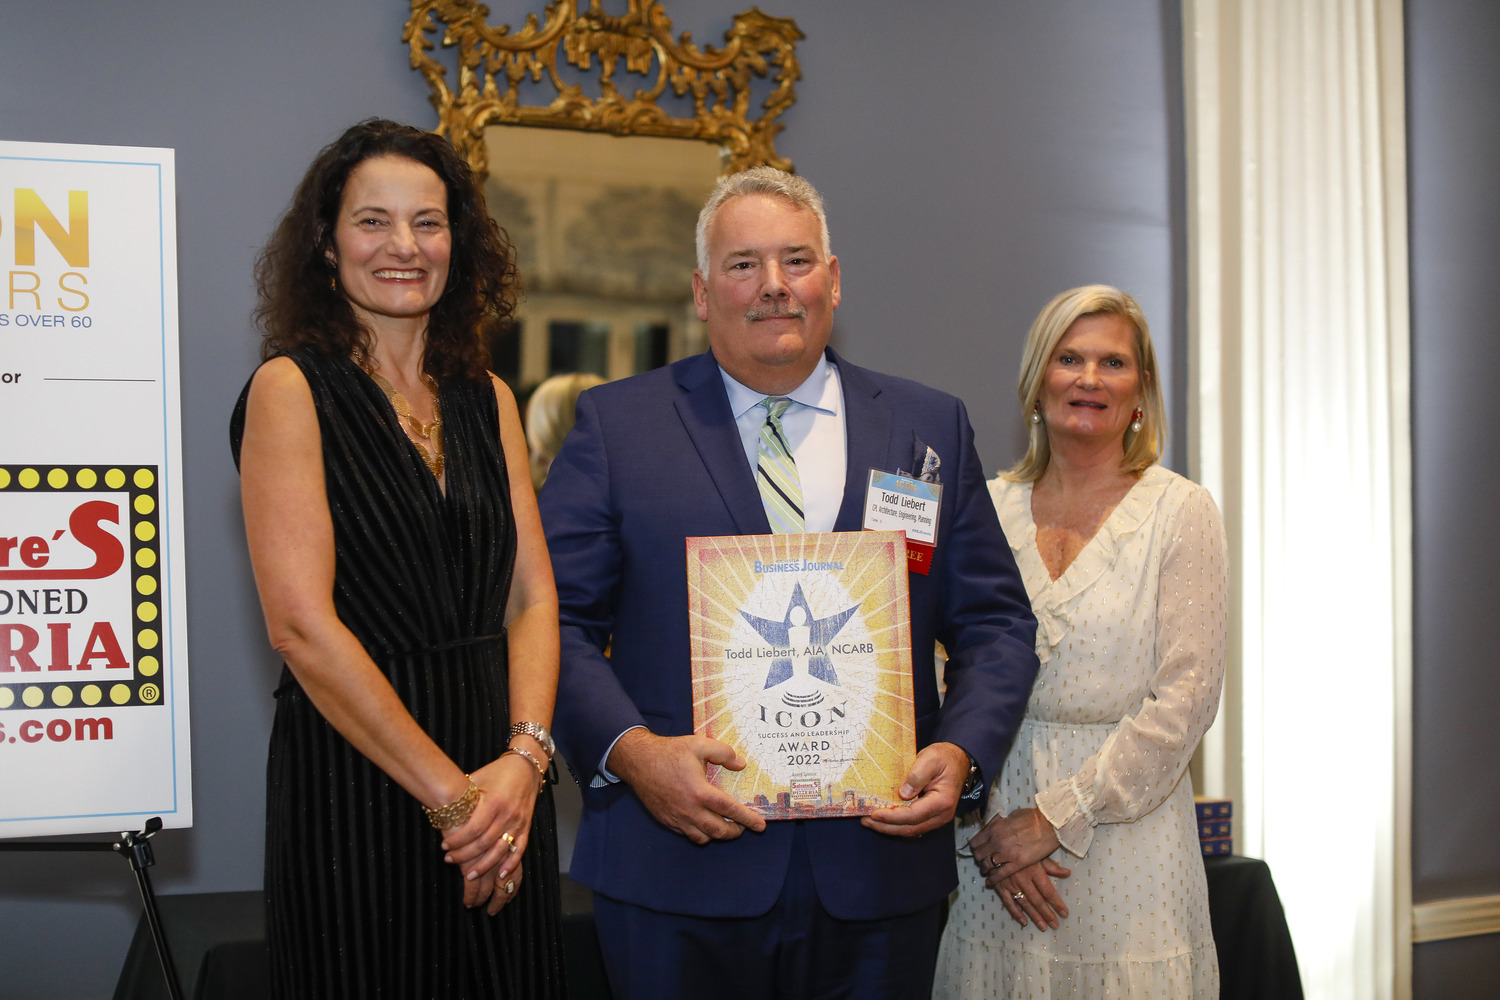 Image shows a woman, a man, and another woman standing next to each other and smiling. The man in the middle, Todd Liebert, CEO of CPL, is holding a 2022 ICON Honoree Award from the Rochester Business Journal (RBJ).